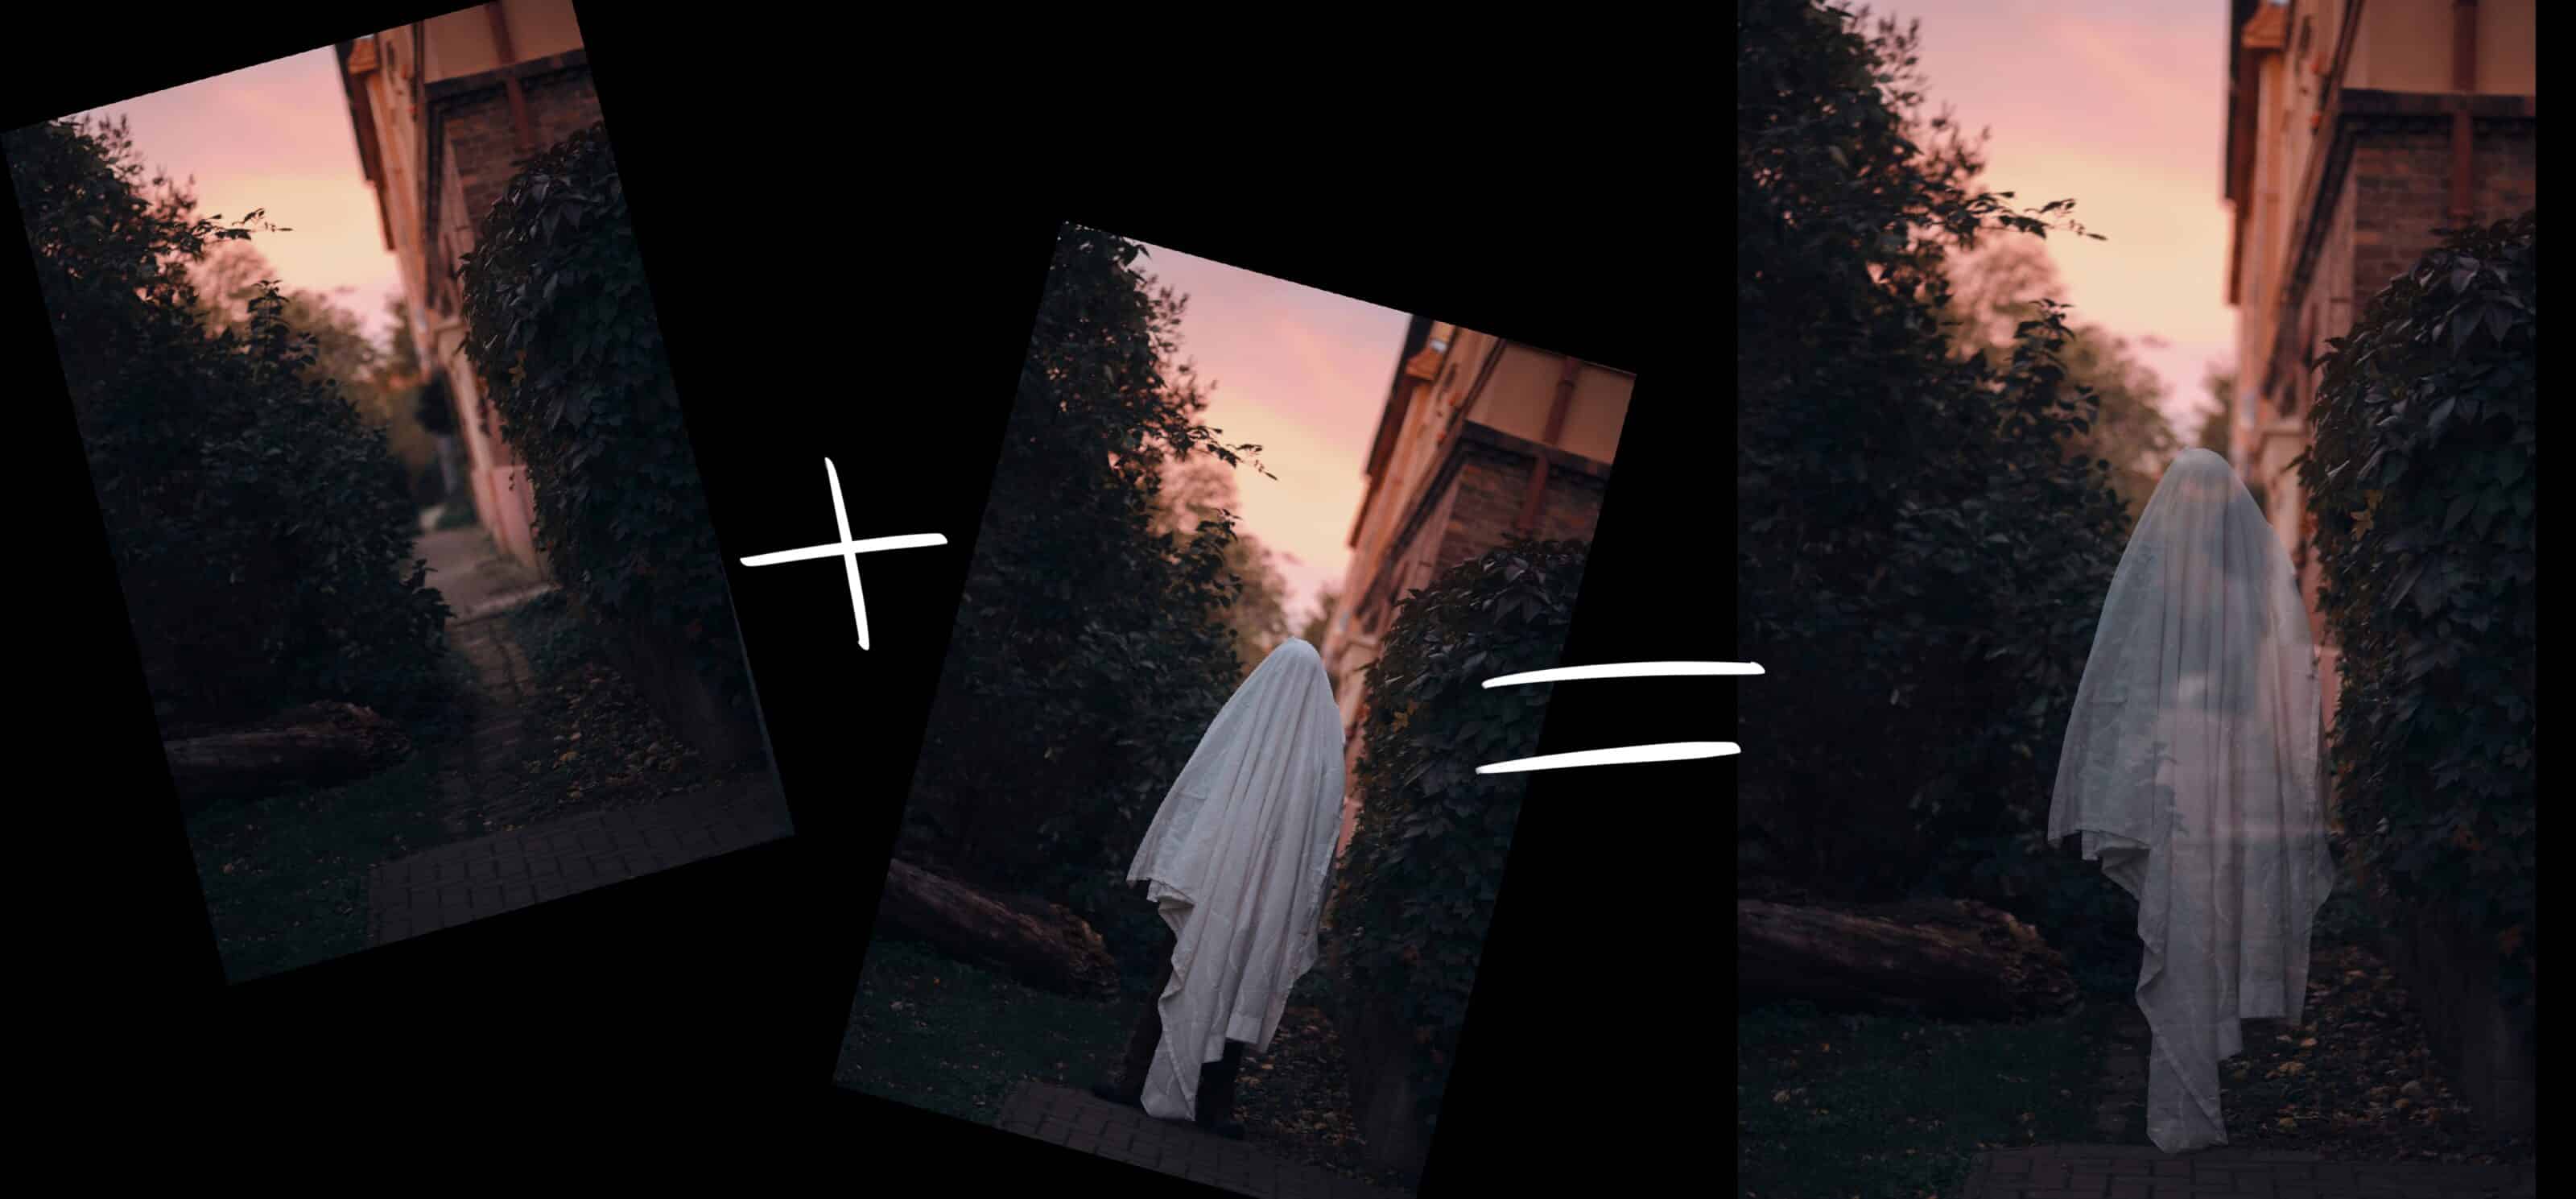 Ghost Photography Tutorial